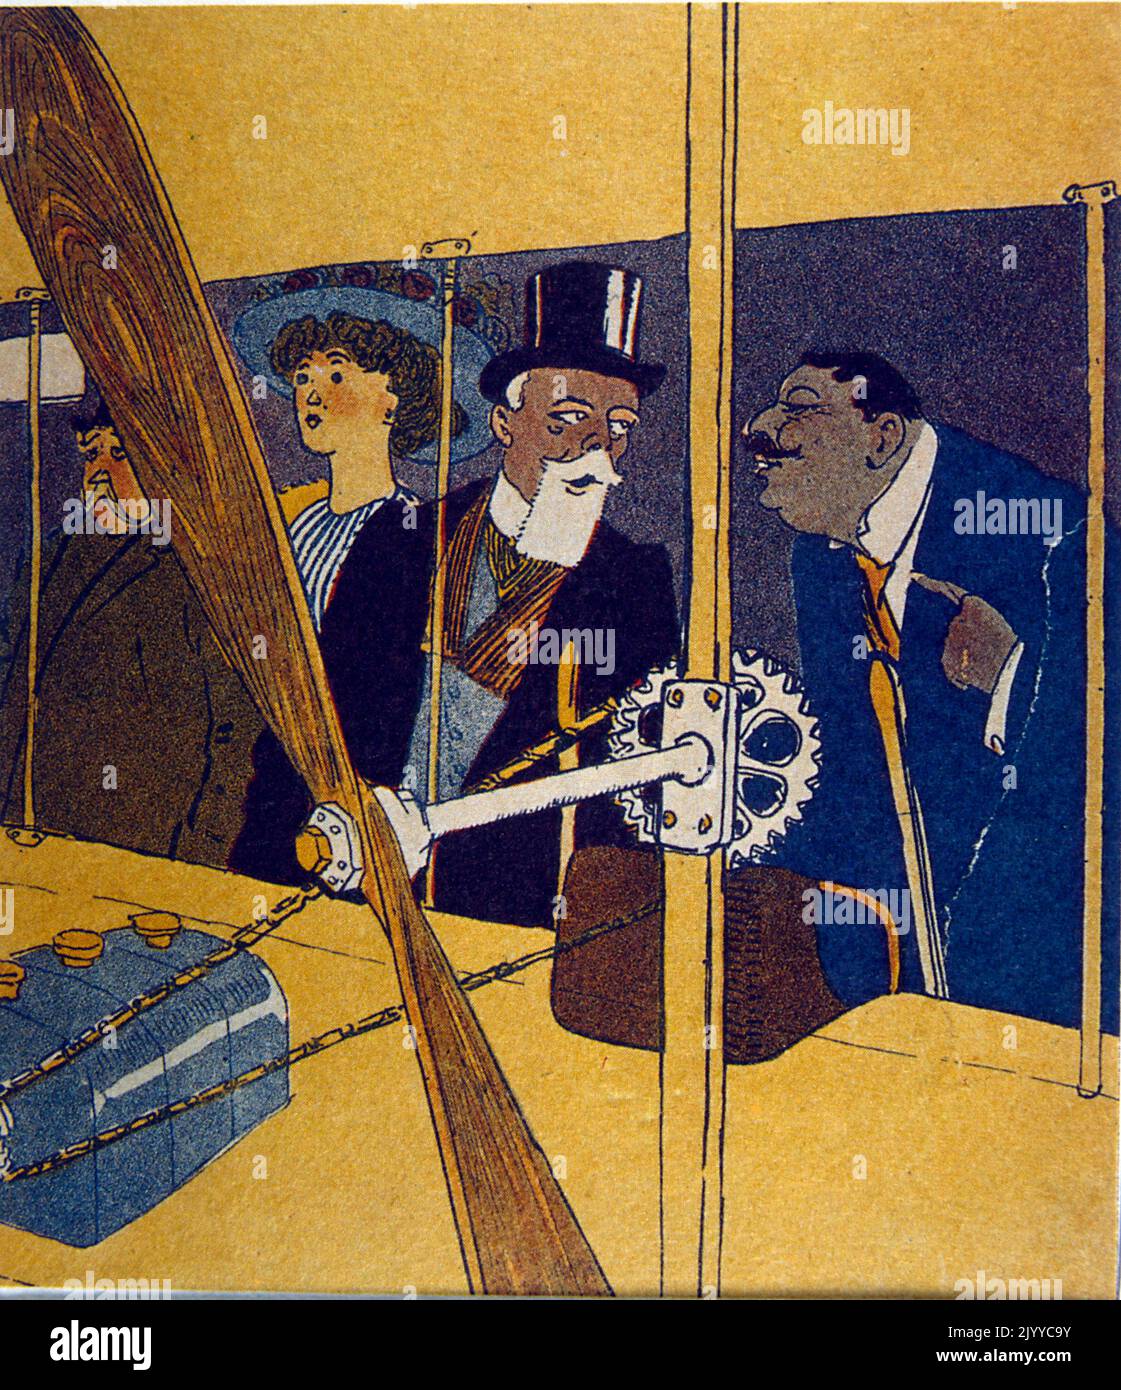 Coloured Illustration of a well-dressed, top-hatted man looking at an Exhibit of a propeller. Stock Photo